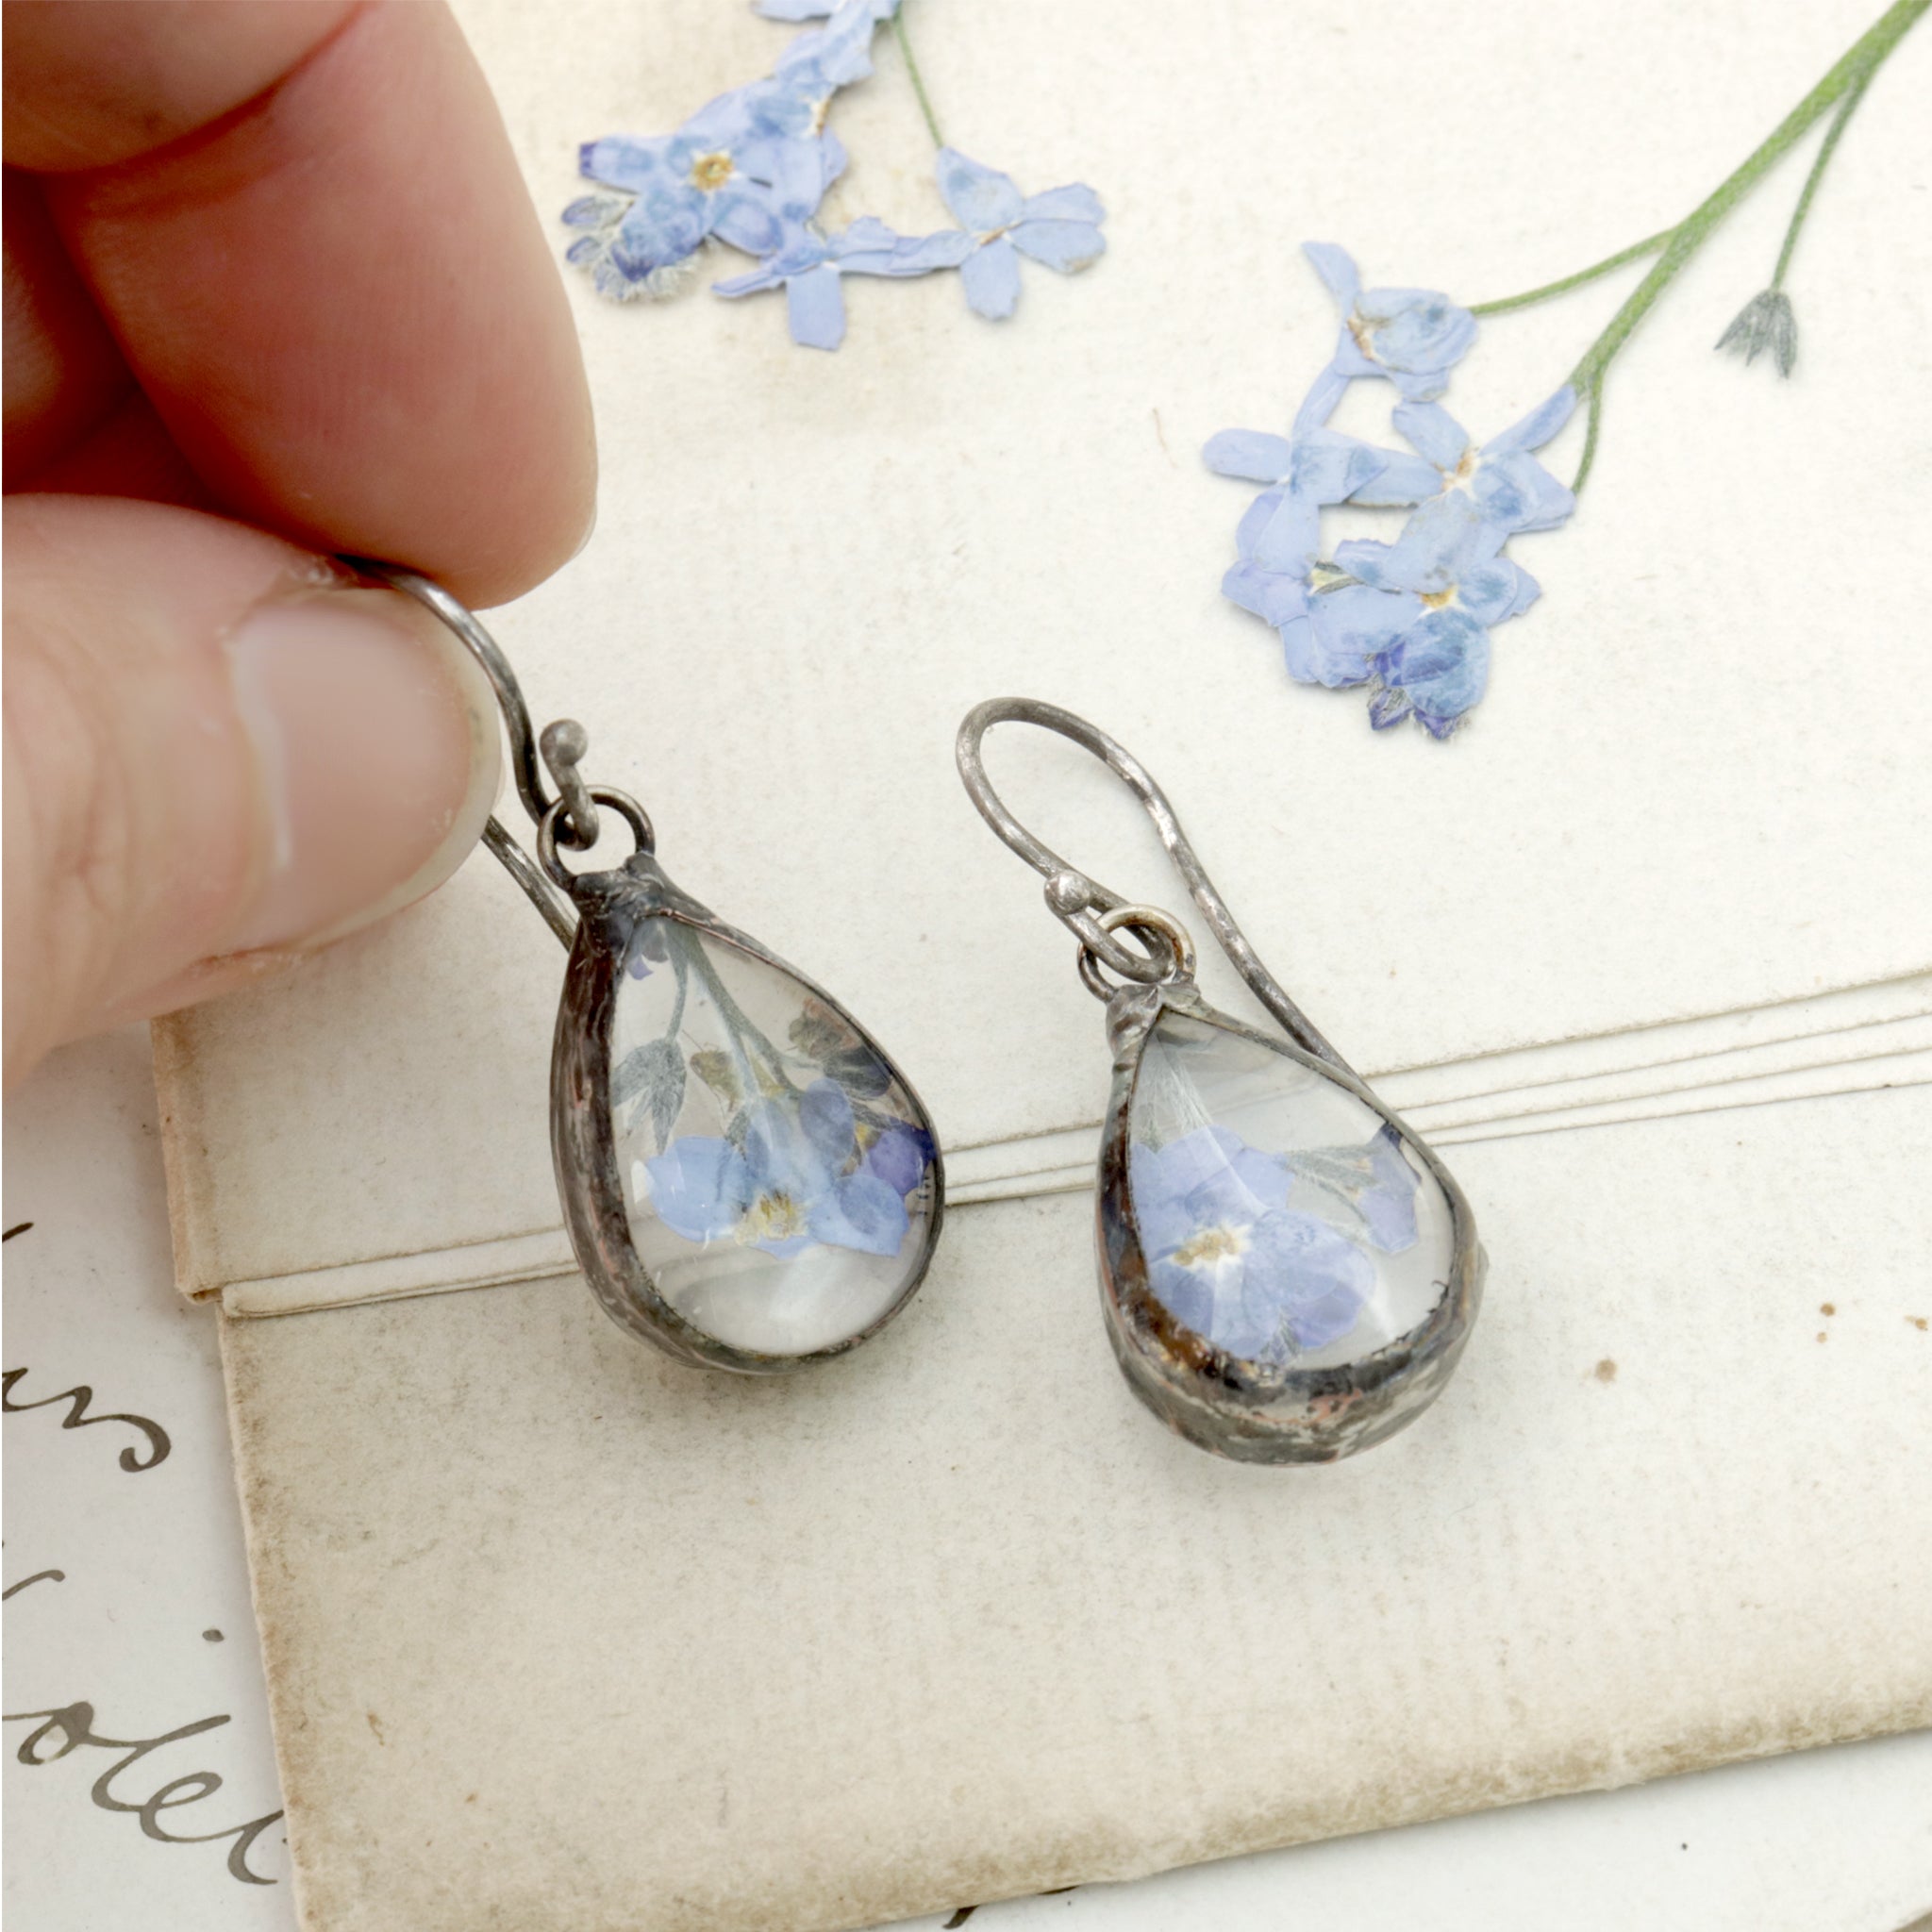 Teardrop shaped forget-me-not earrings lying on an old letter one being held in hand